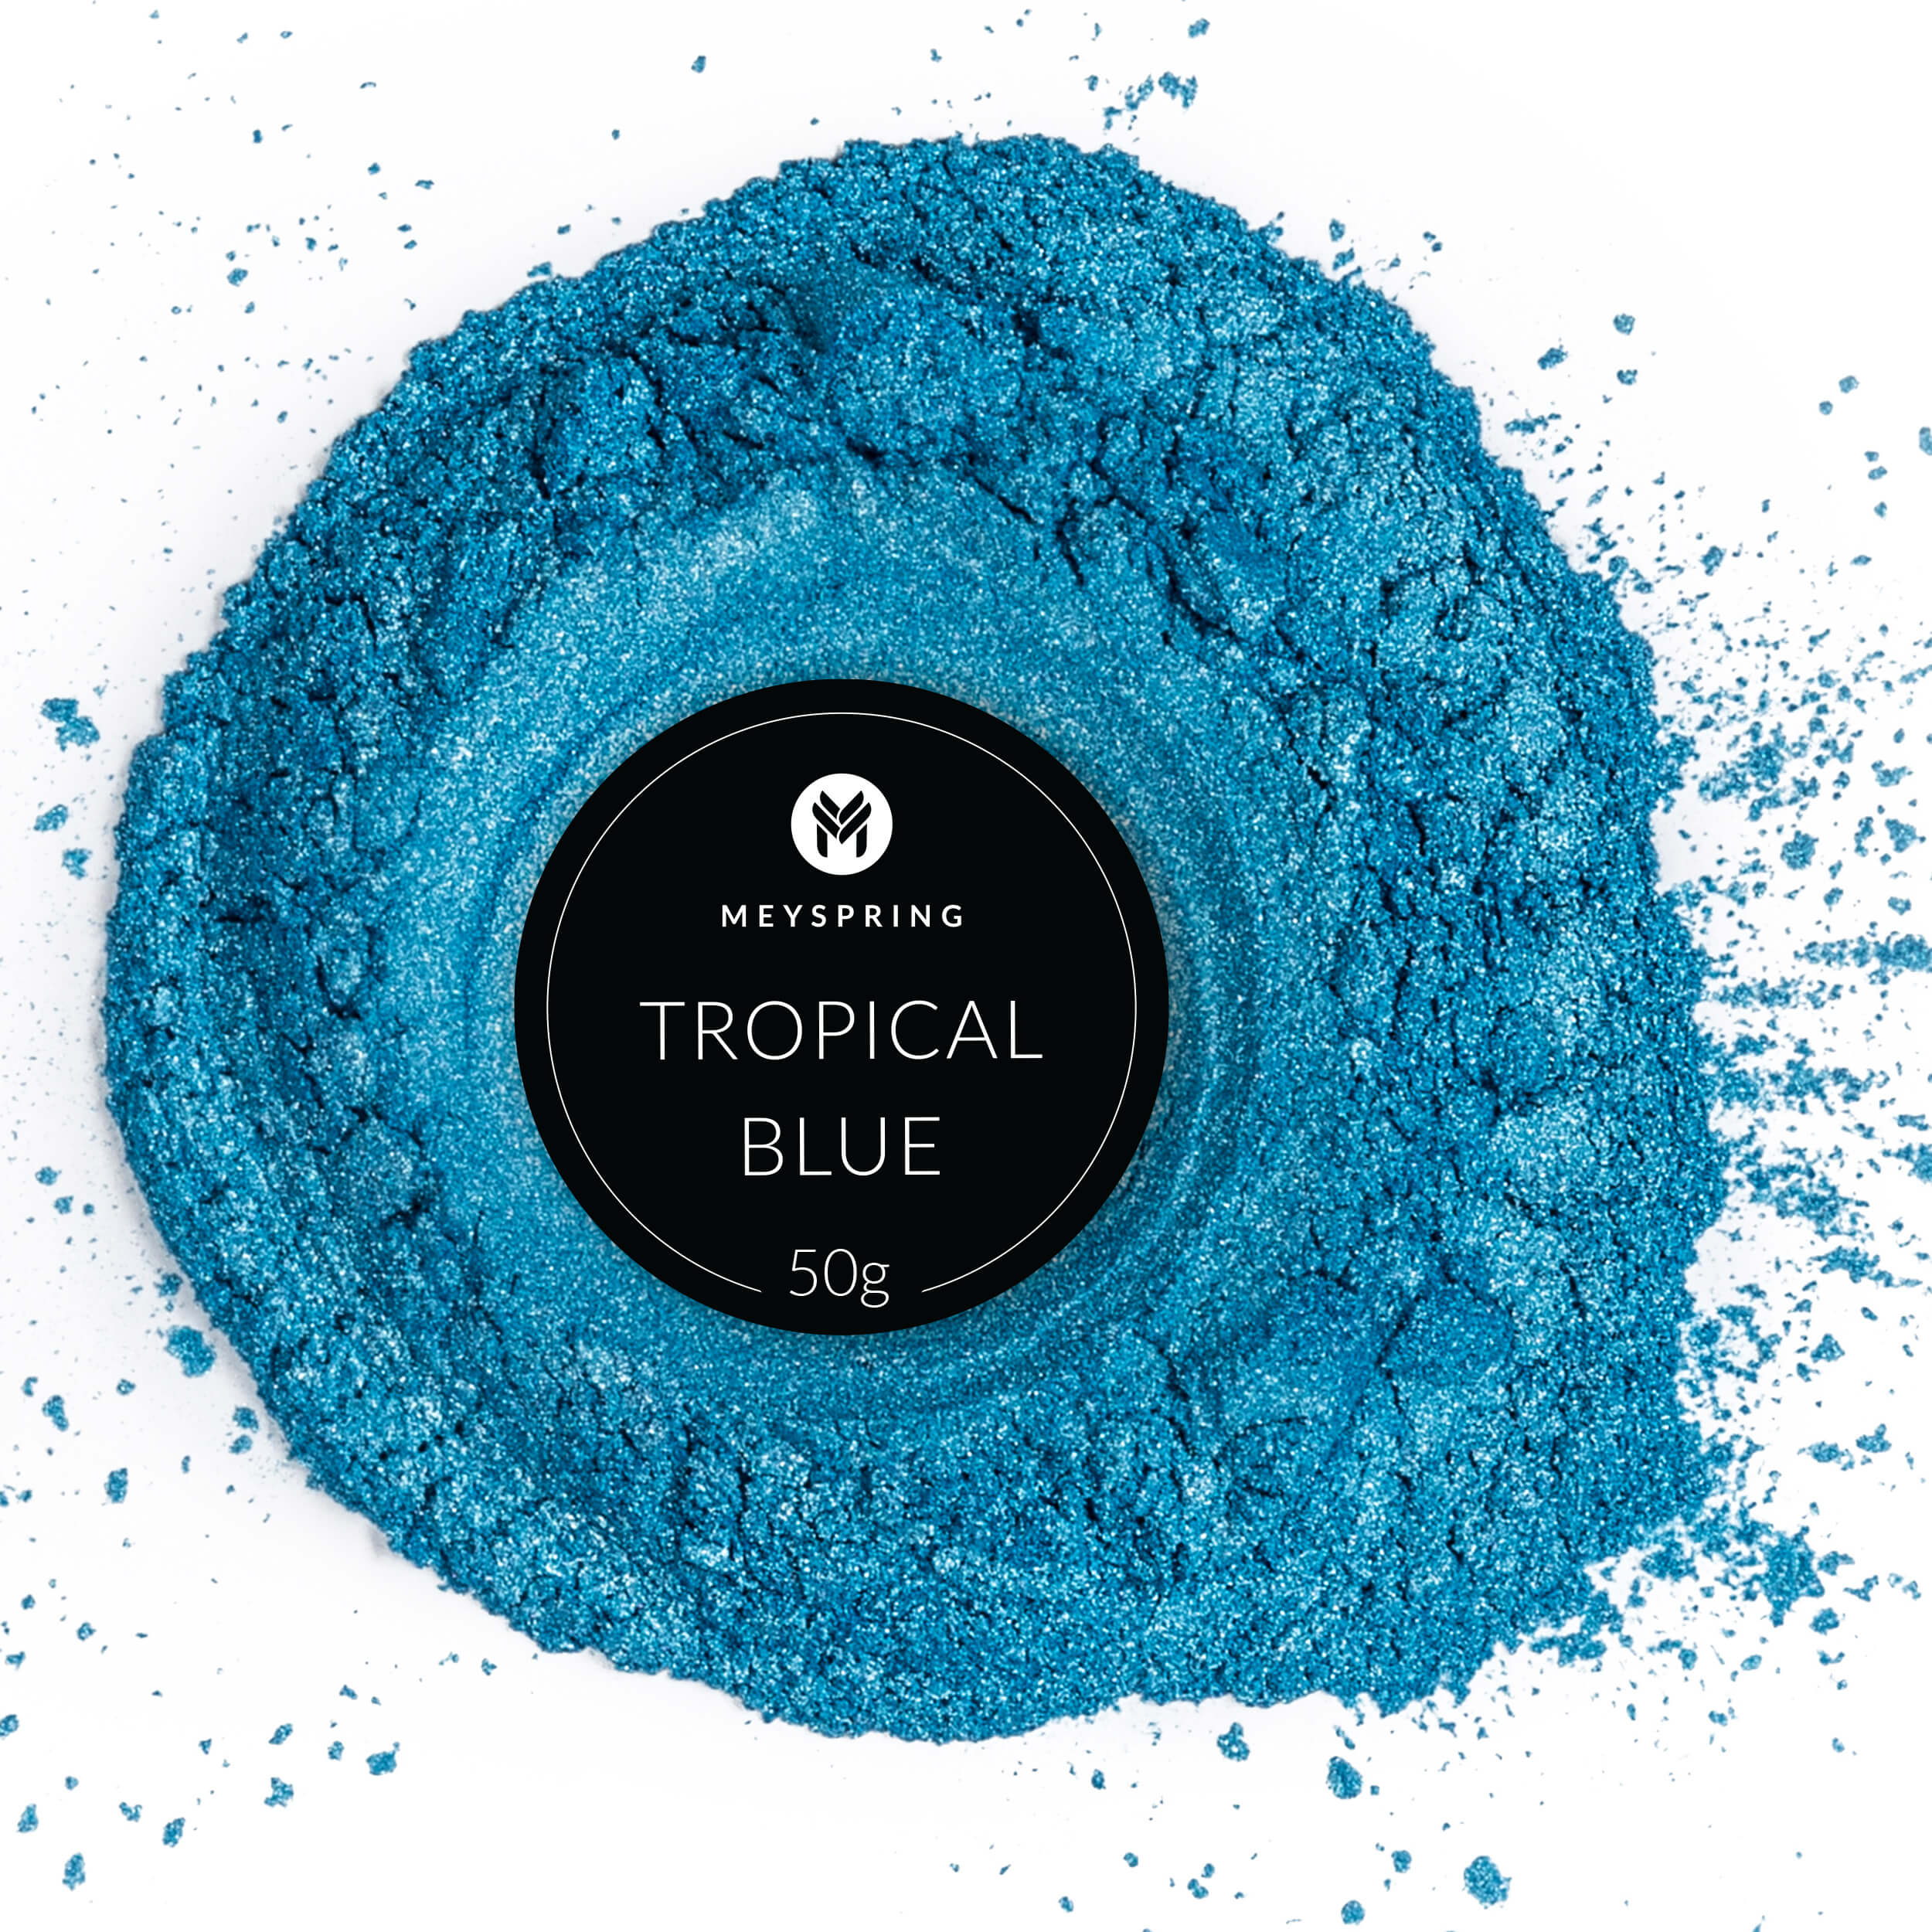 MEYSPRING Tropical Blue Epoxy resin color pigment Mica Powder for resin art